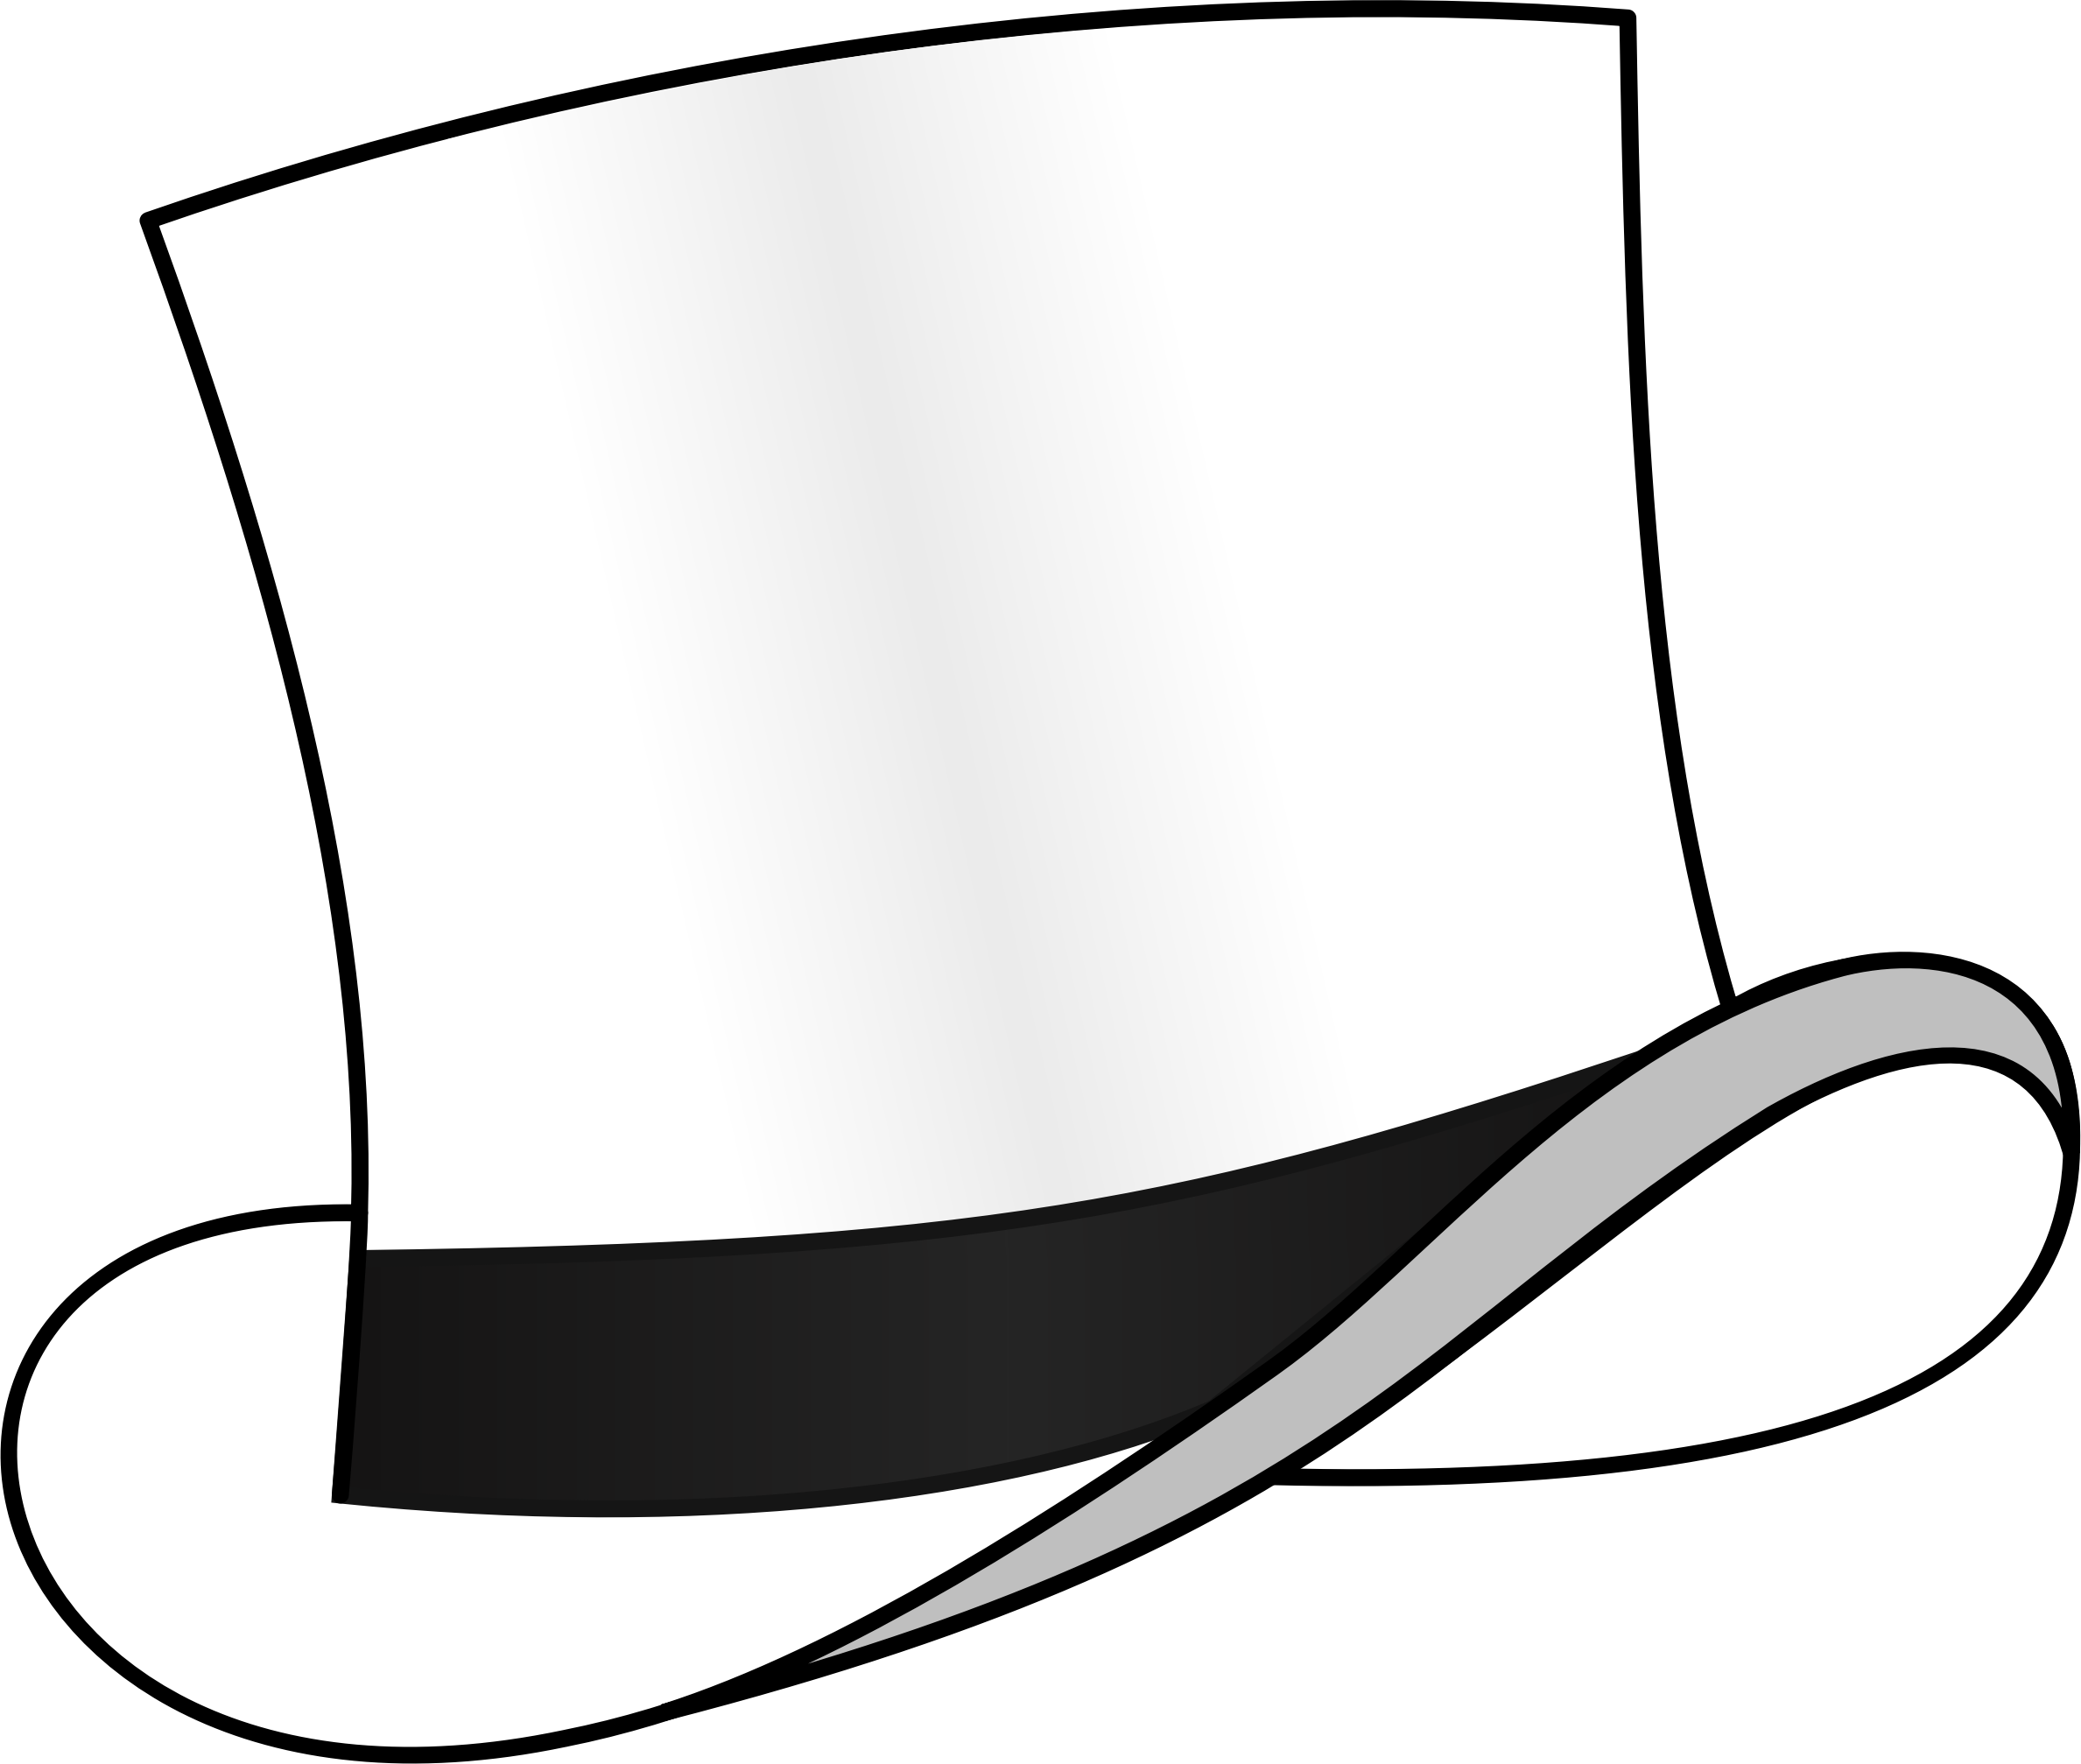 Big Image - Top Hat Black And White (2377x2015)